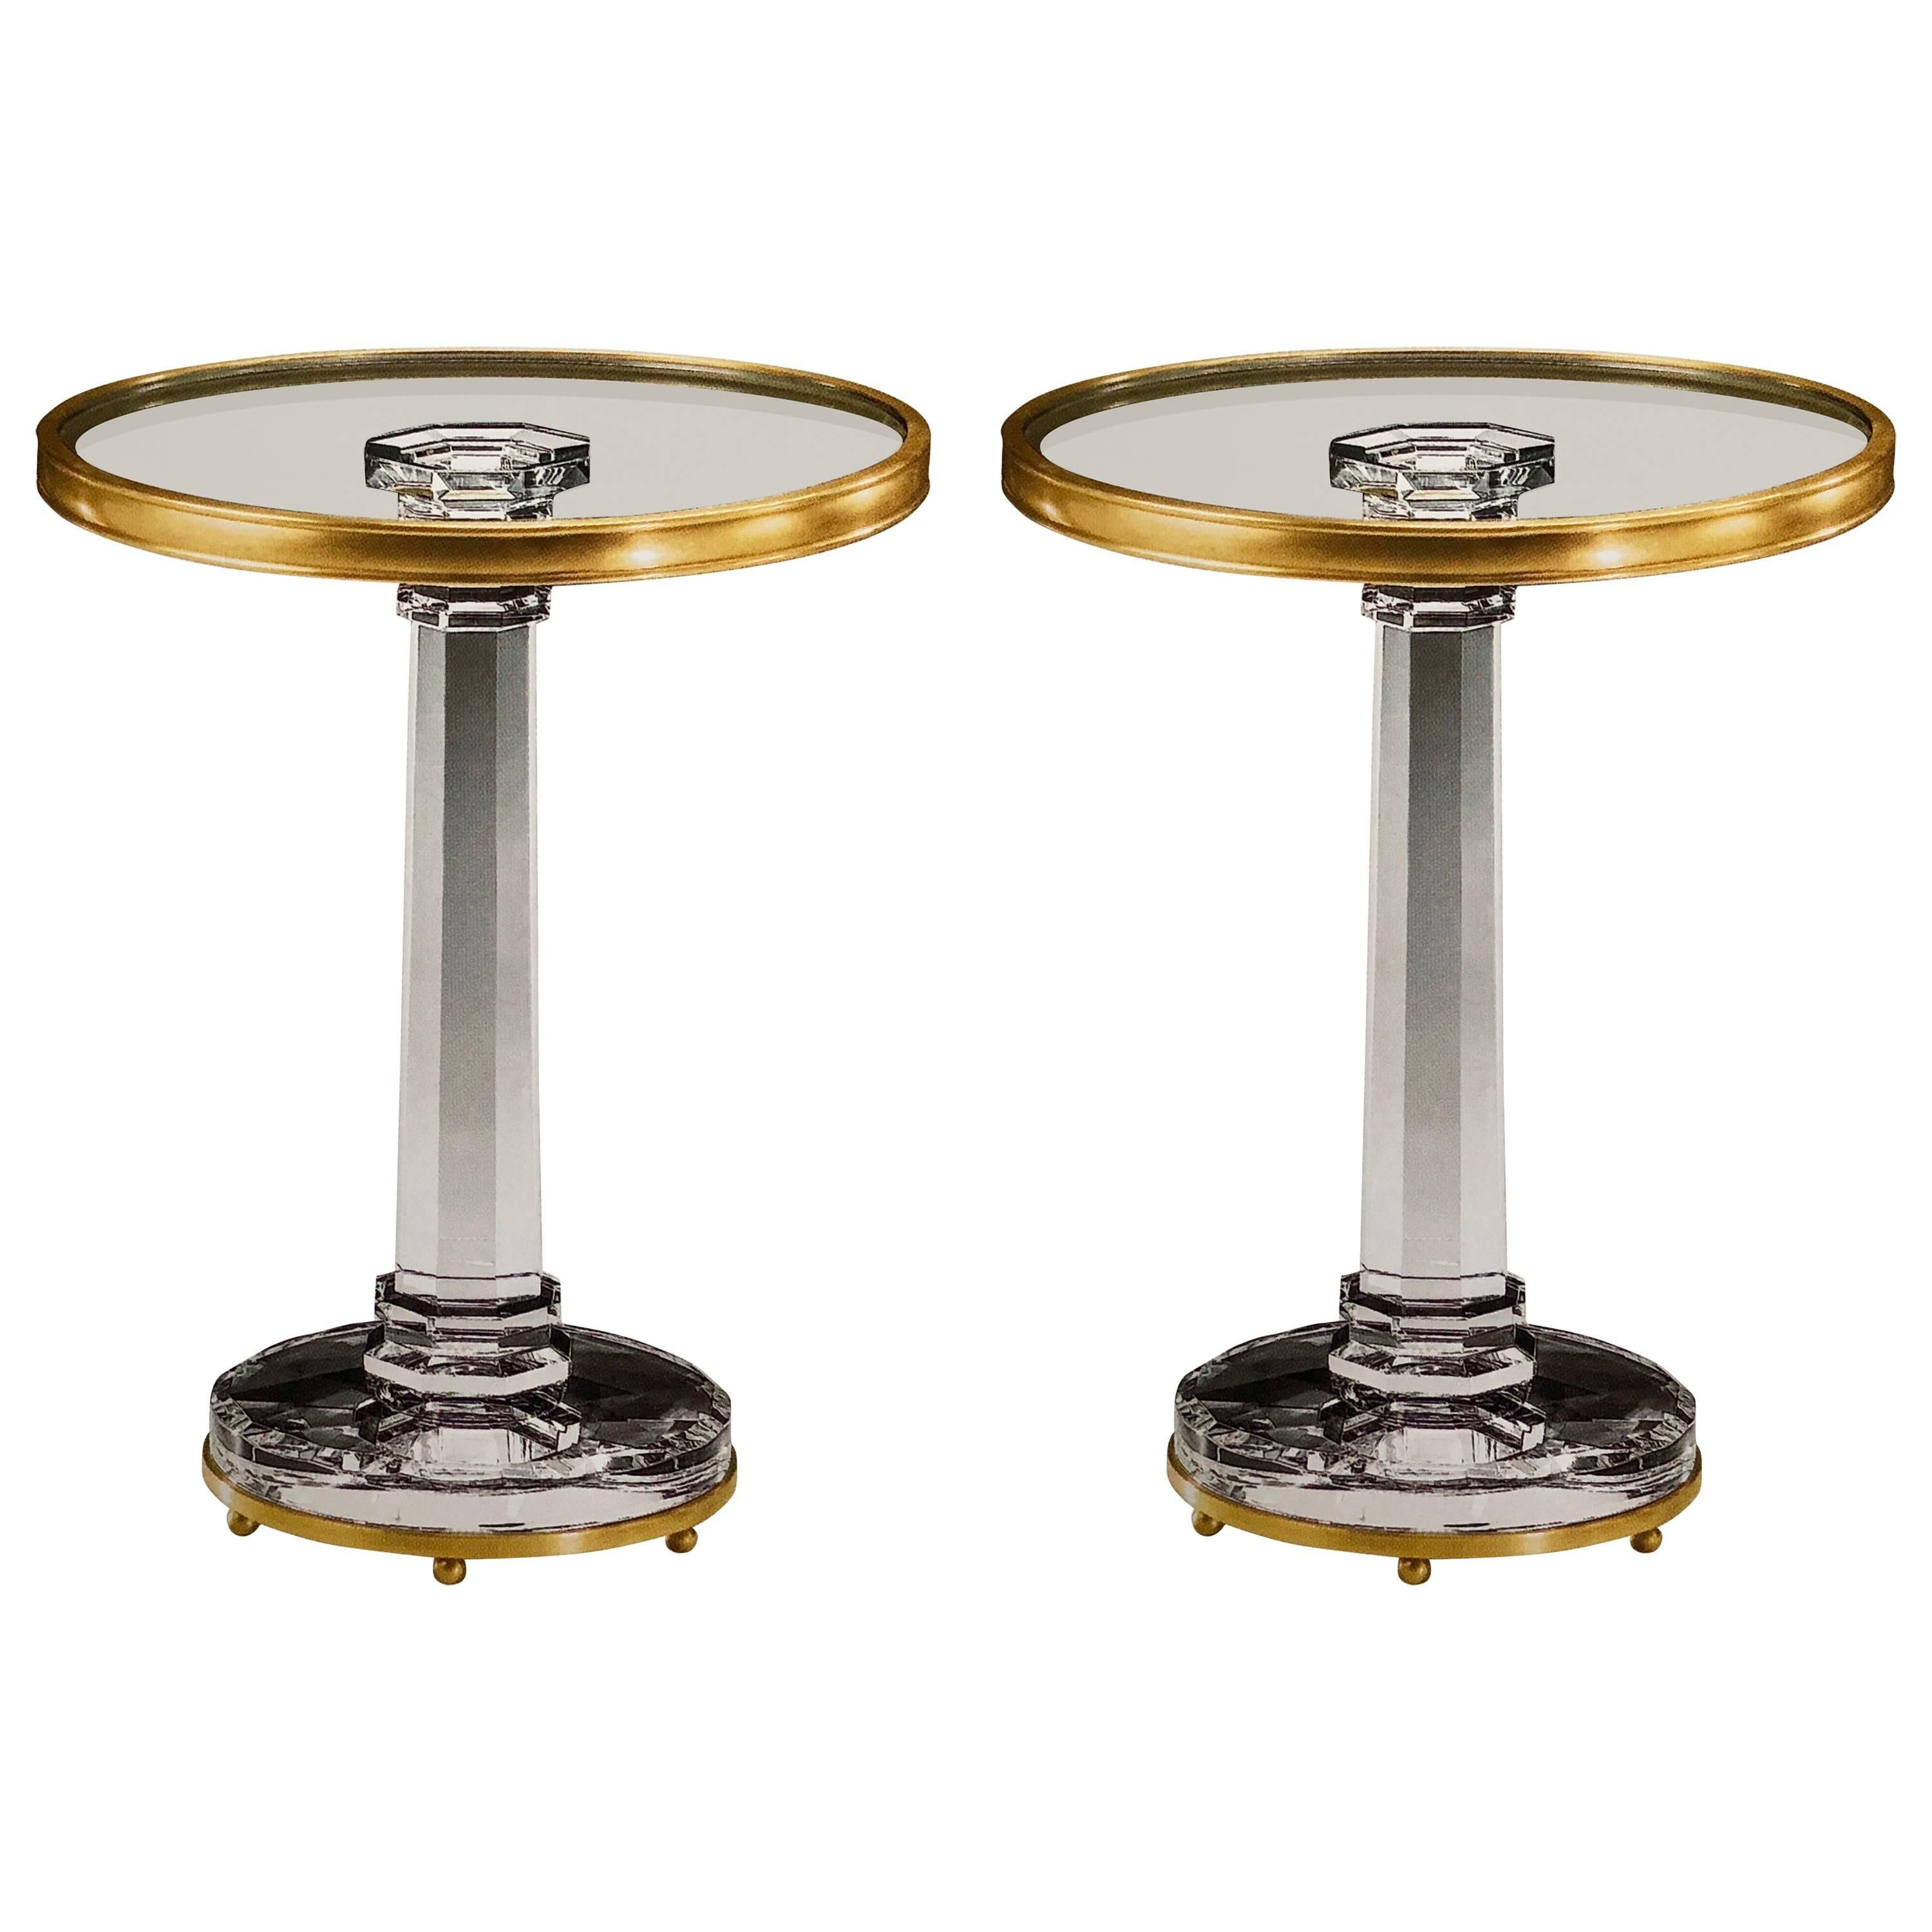 Two Italian Mid-Century Modern Style Solid Crystal and Antique Brass Side Tables